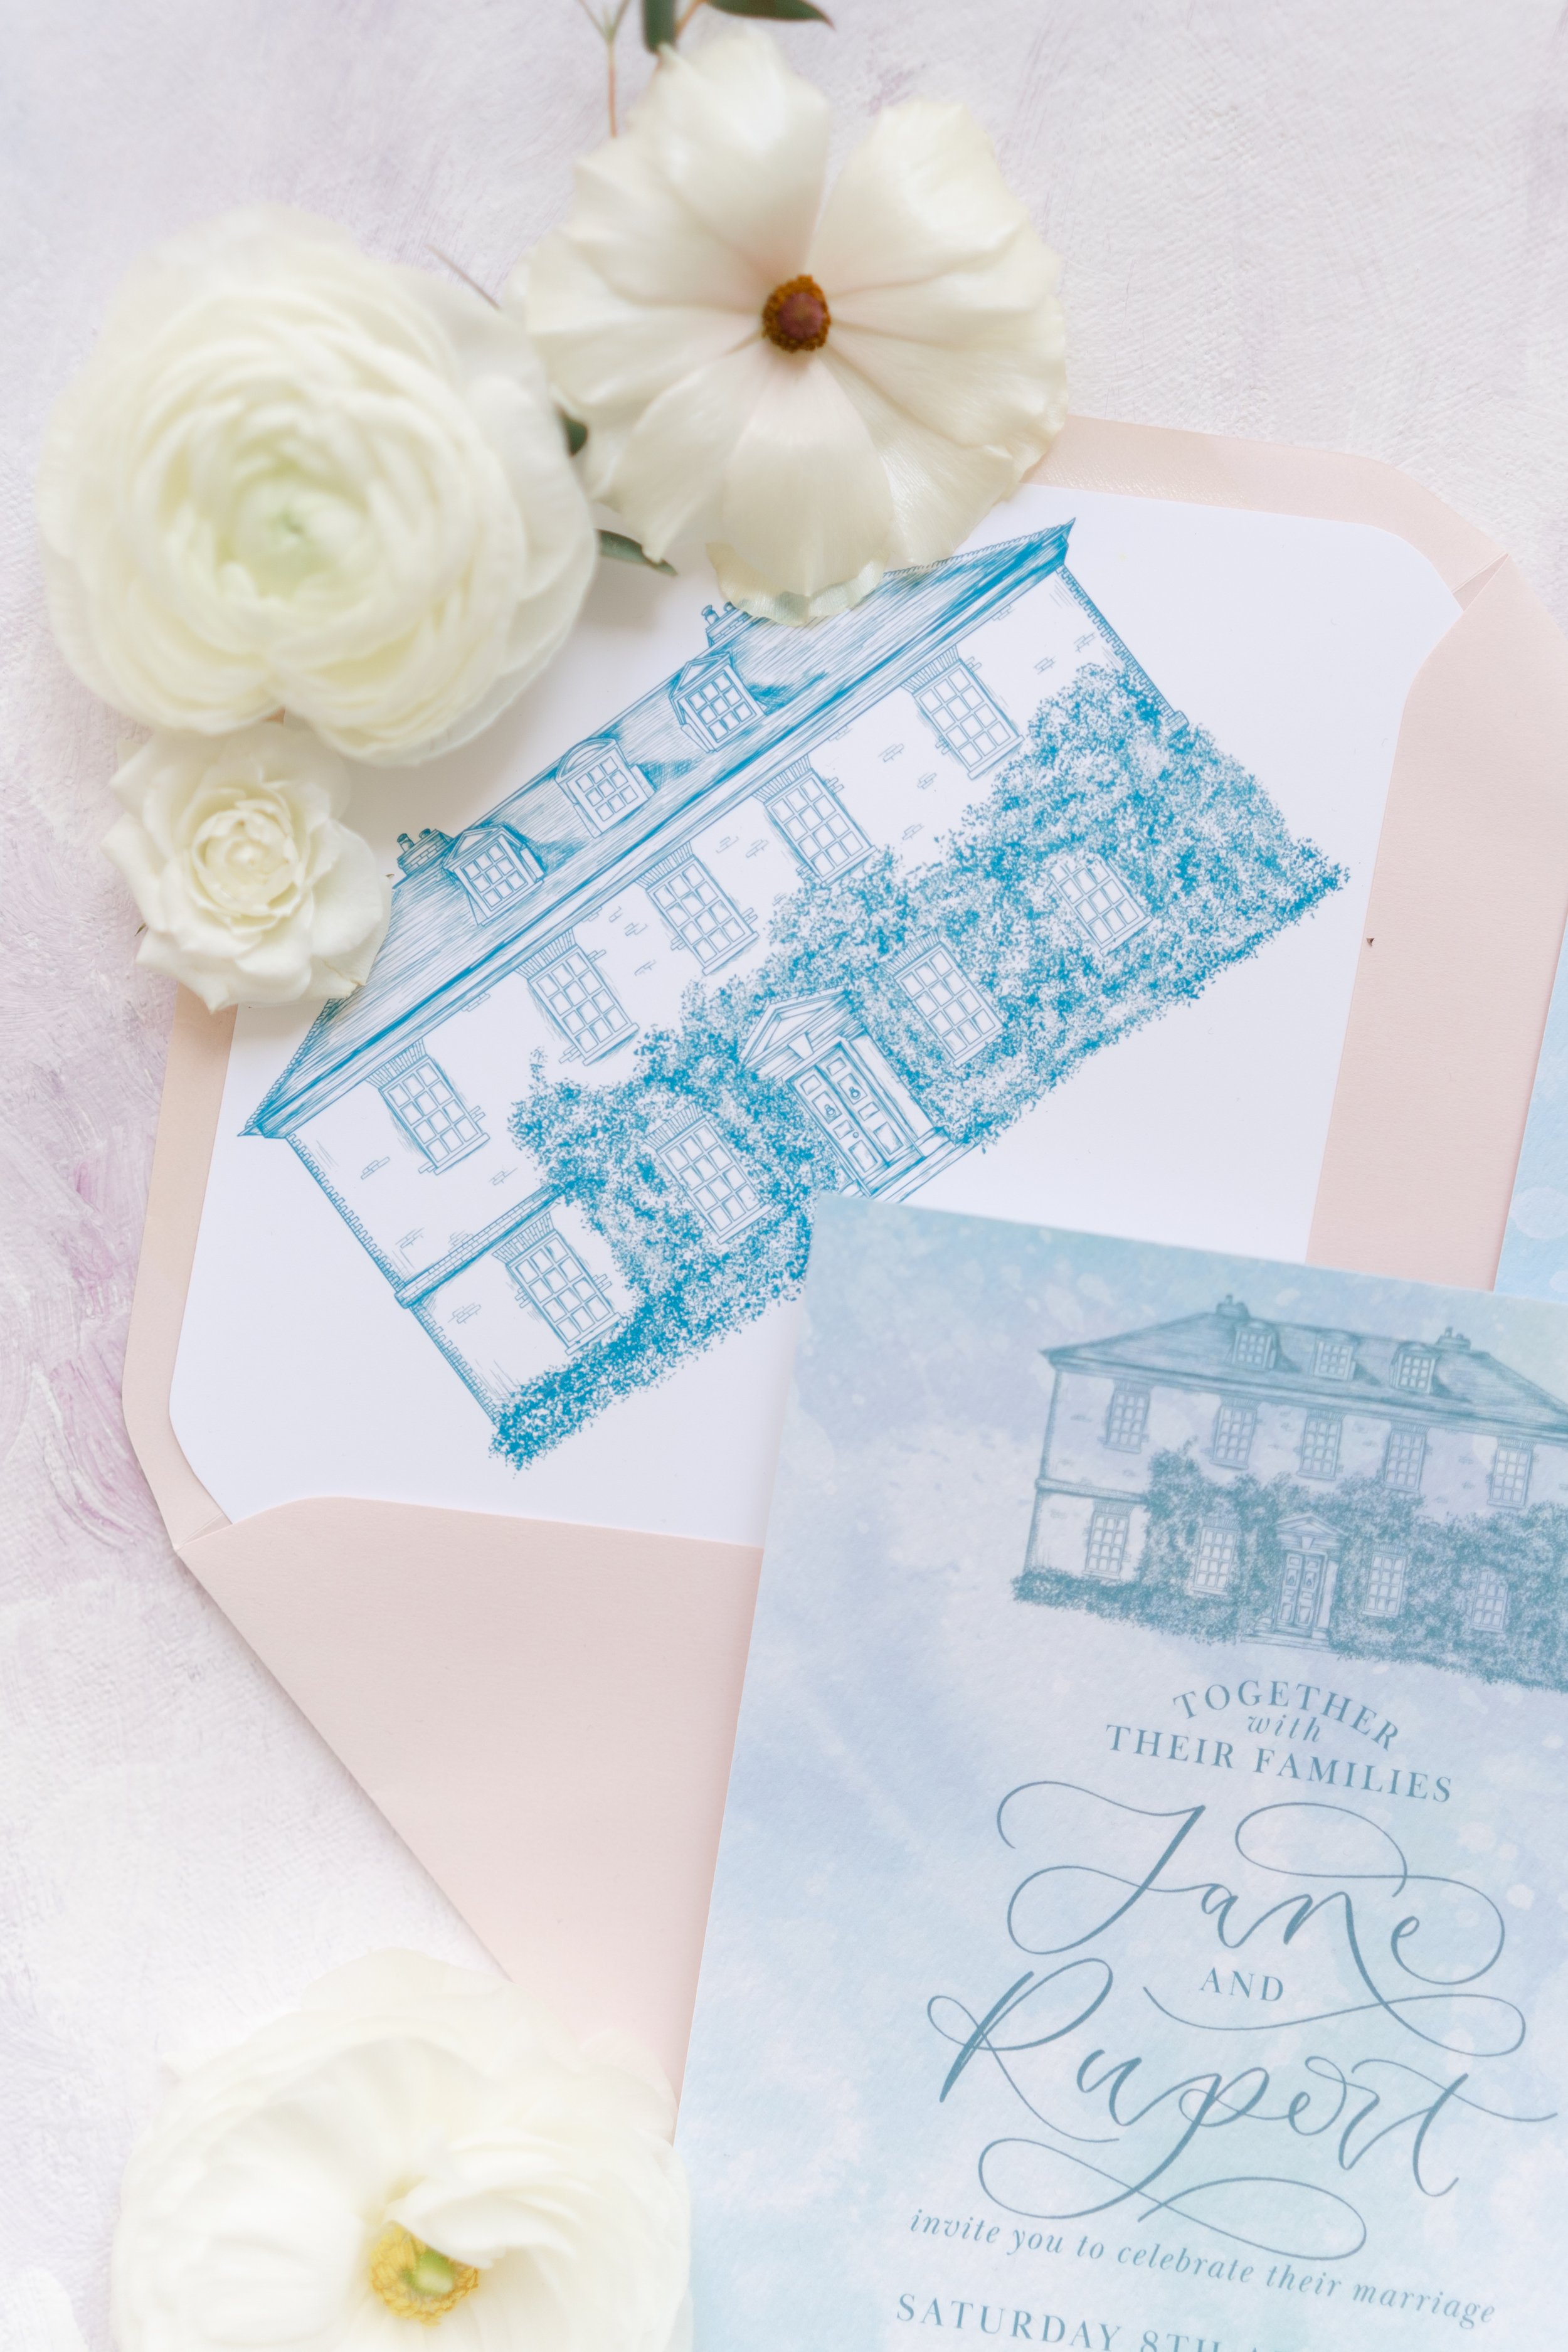 Envelope liner with venue illustration of sprivers mansion - The Amyverse - Teal and pink wedding stationery - Pastel invitations.jpg